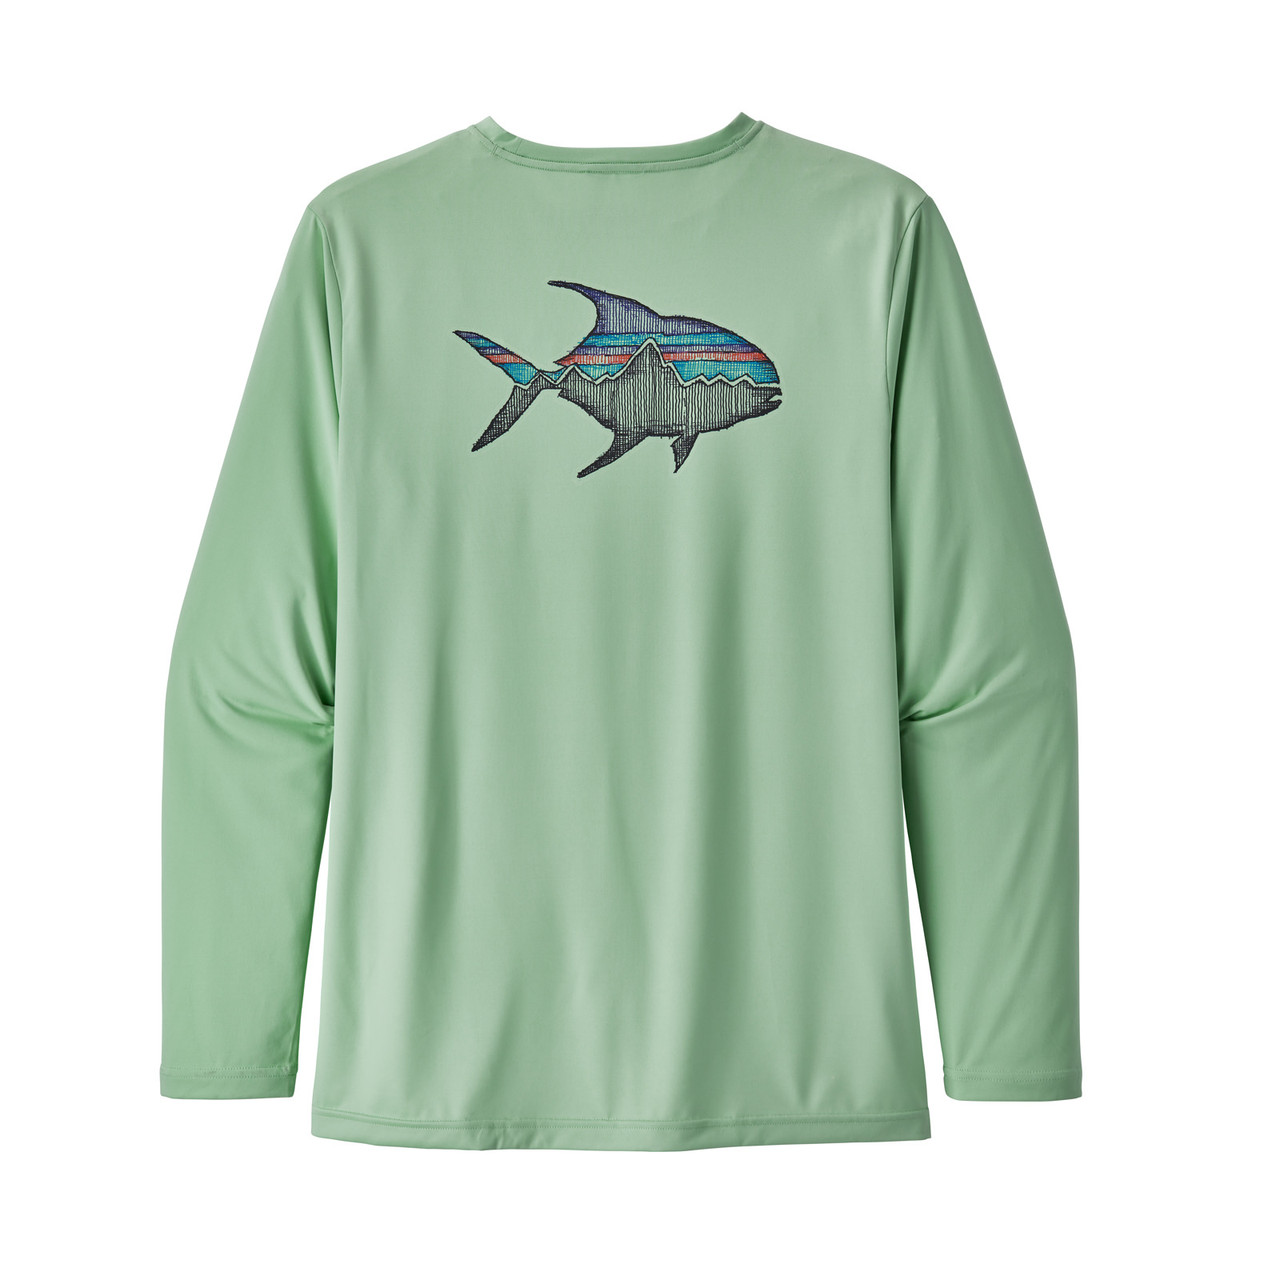 Patagonia Men's Graphic Tech Fish Tee 52146_EBDS - Duranglers Fly Fishing  Shop & Guides